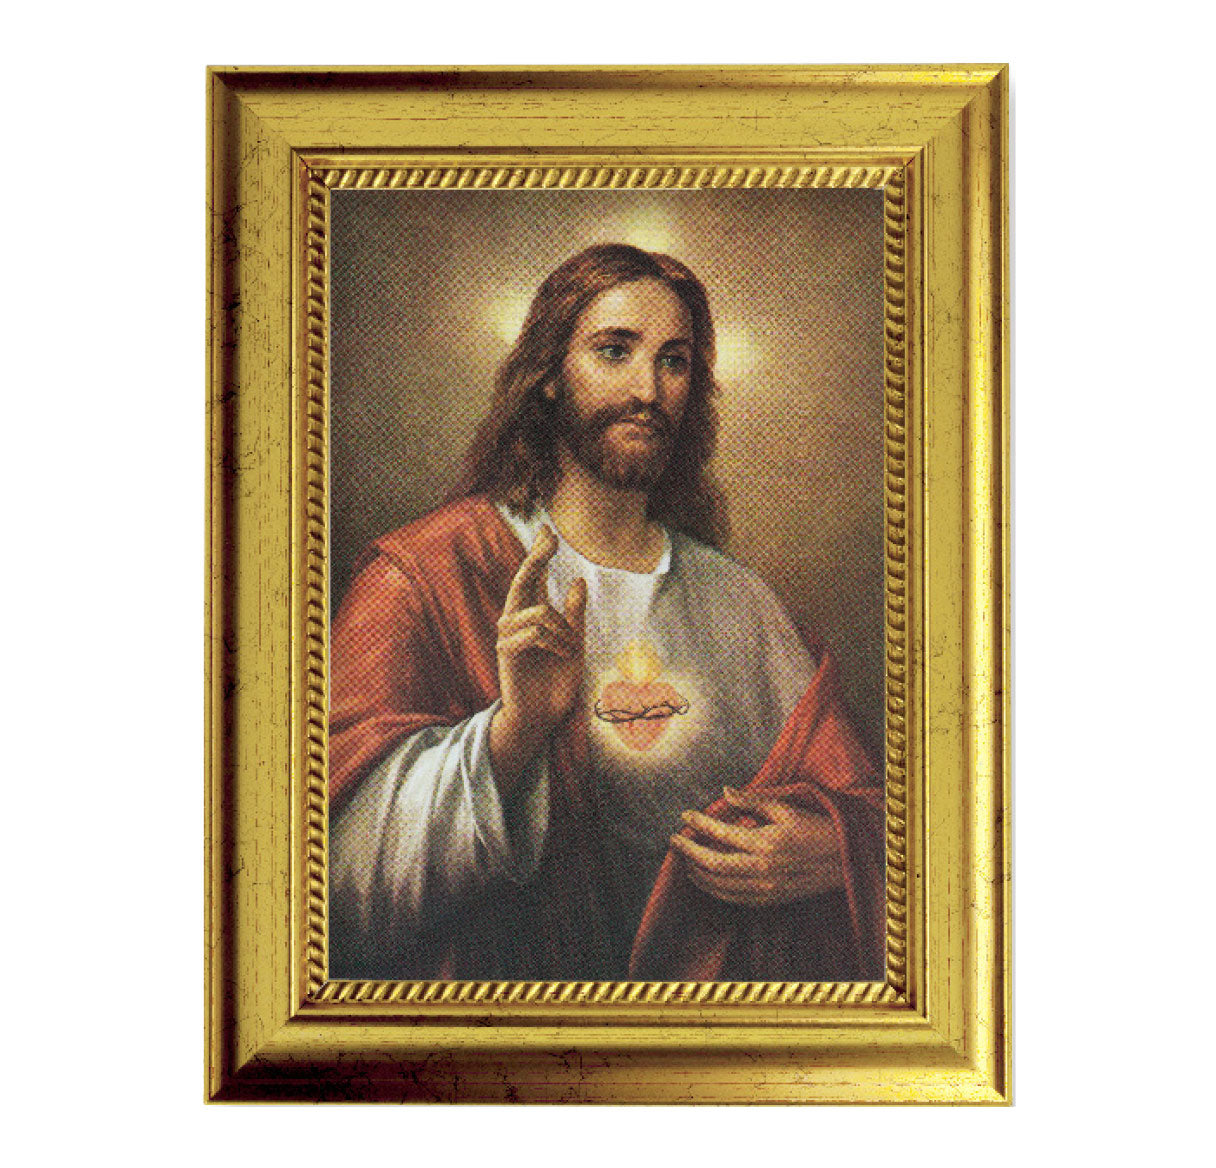 Sacred Heart of Jesus Picture Framed Wall Art Decor, Small, Antique Gold-Leaf Frame with Rope Detailed Lip